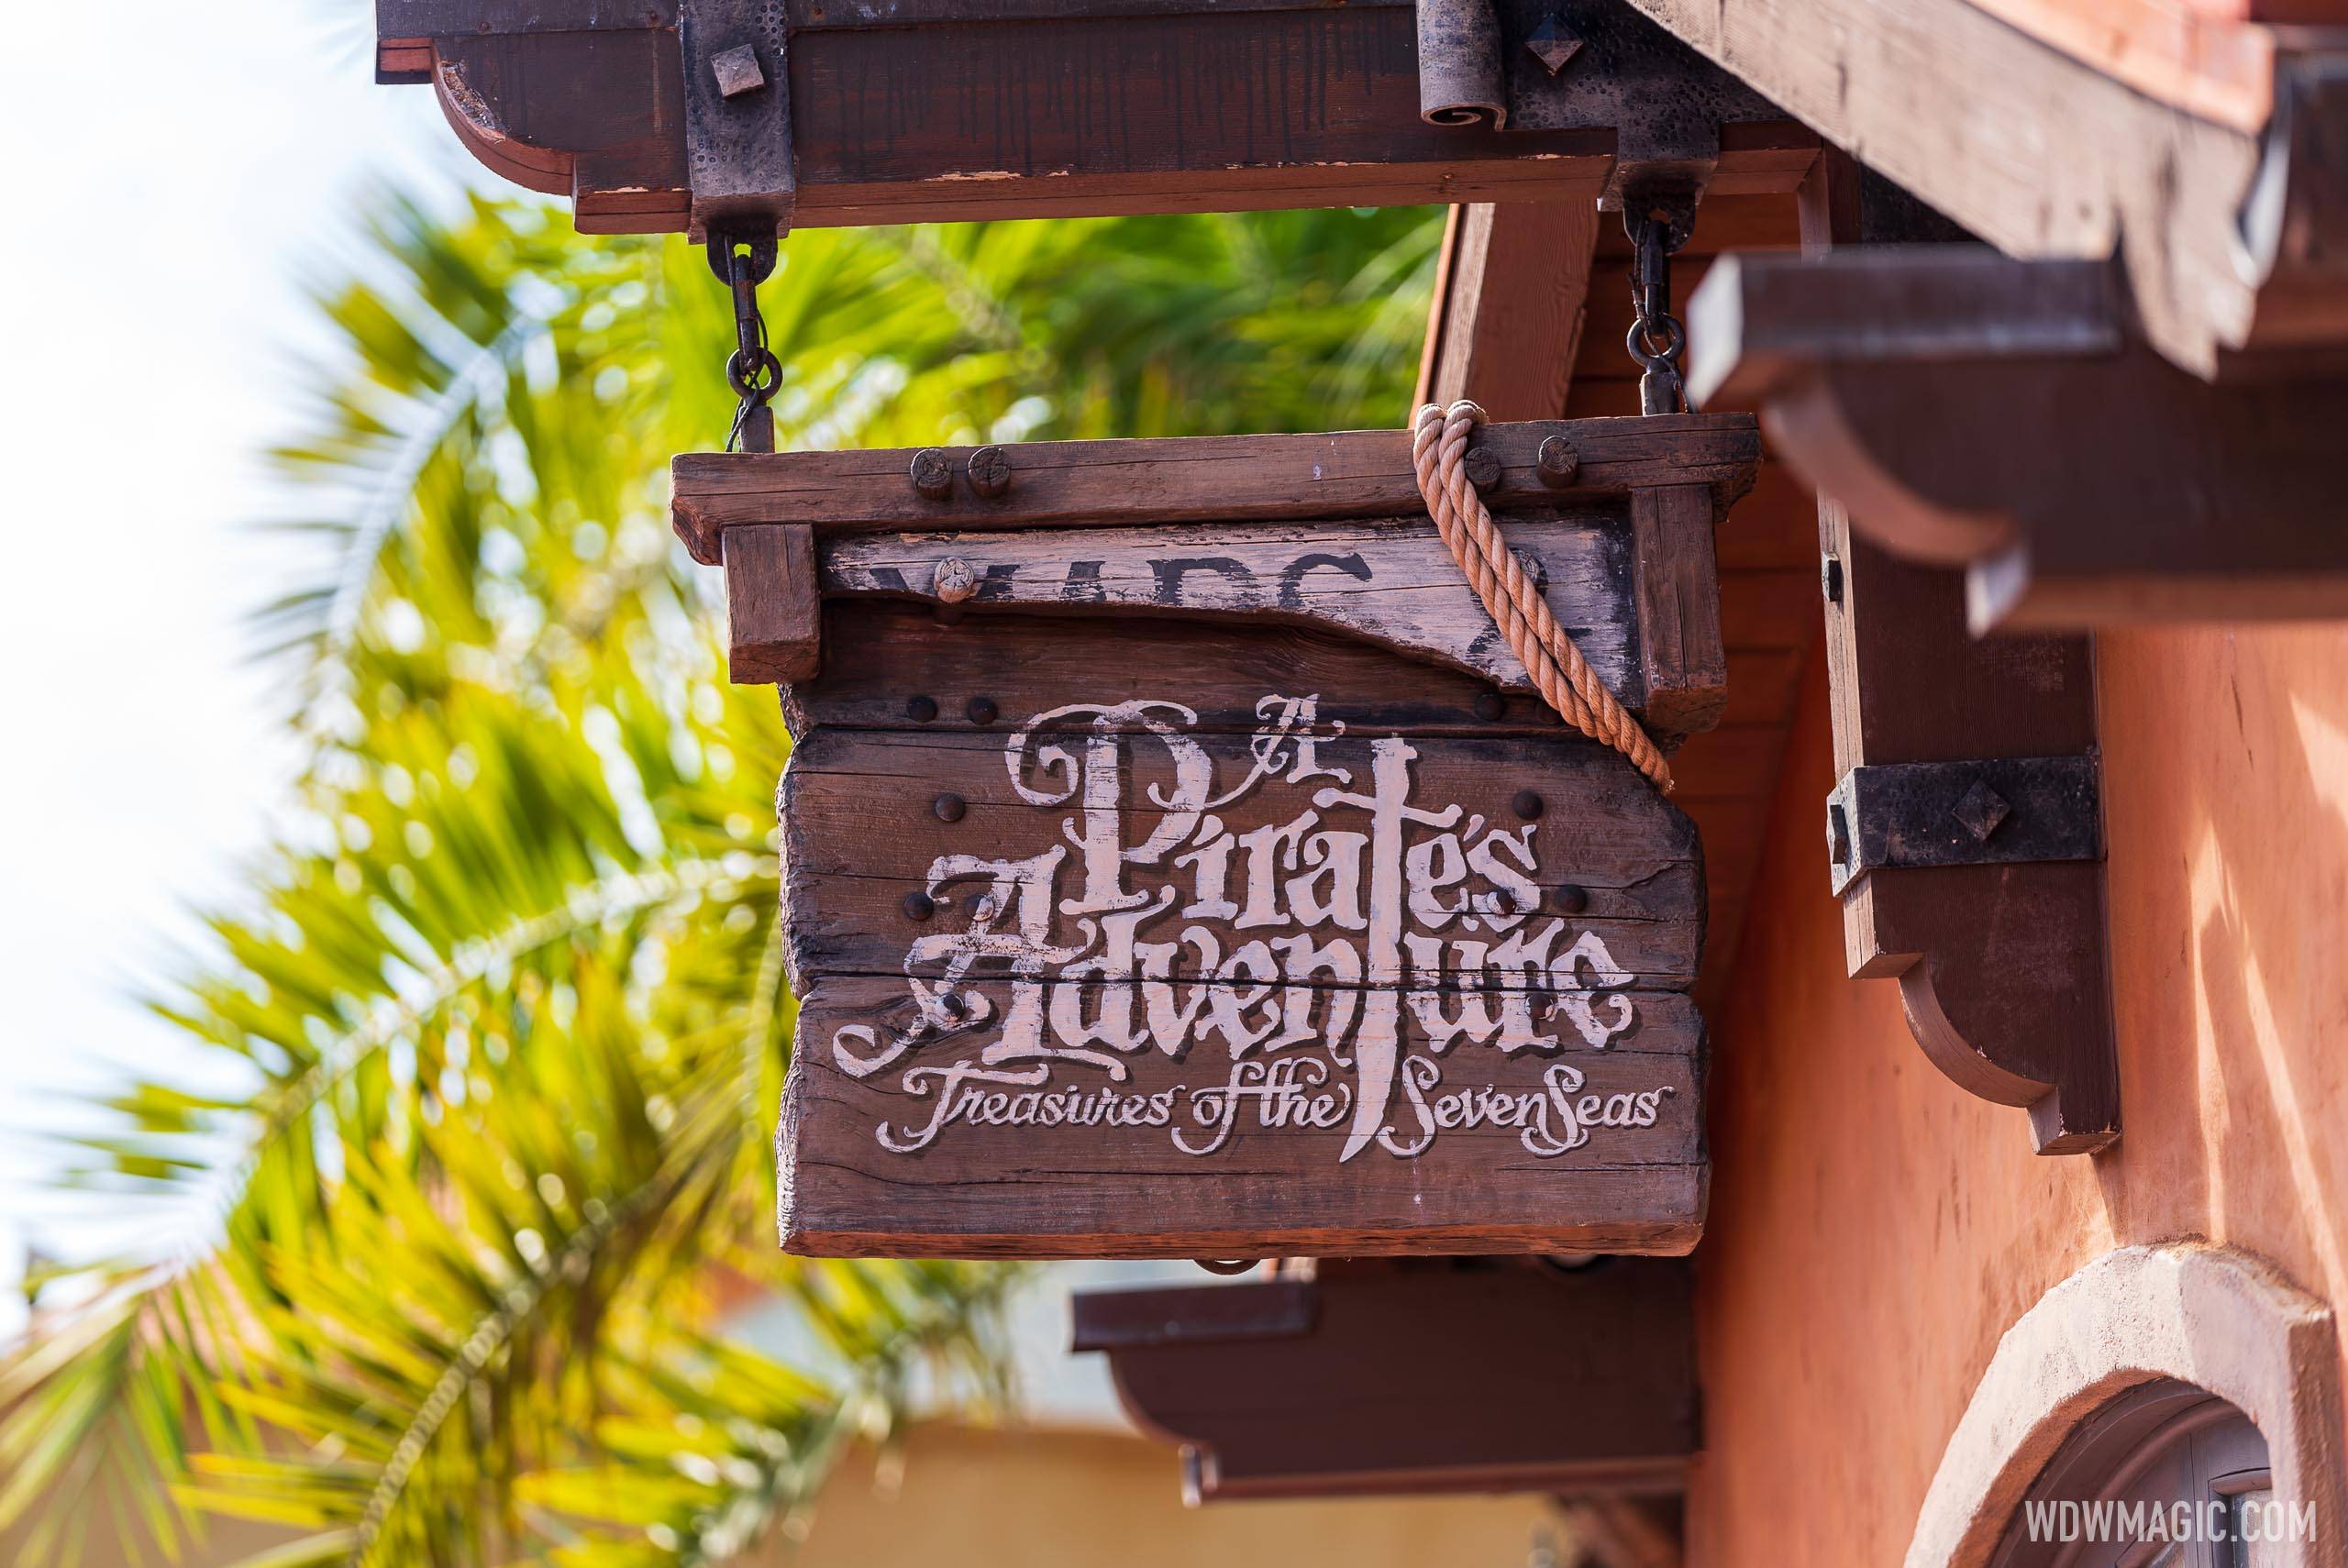 Operating hours reduced for A Pirate's Adventure Treasures of the Seven Seas